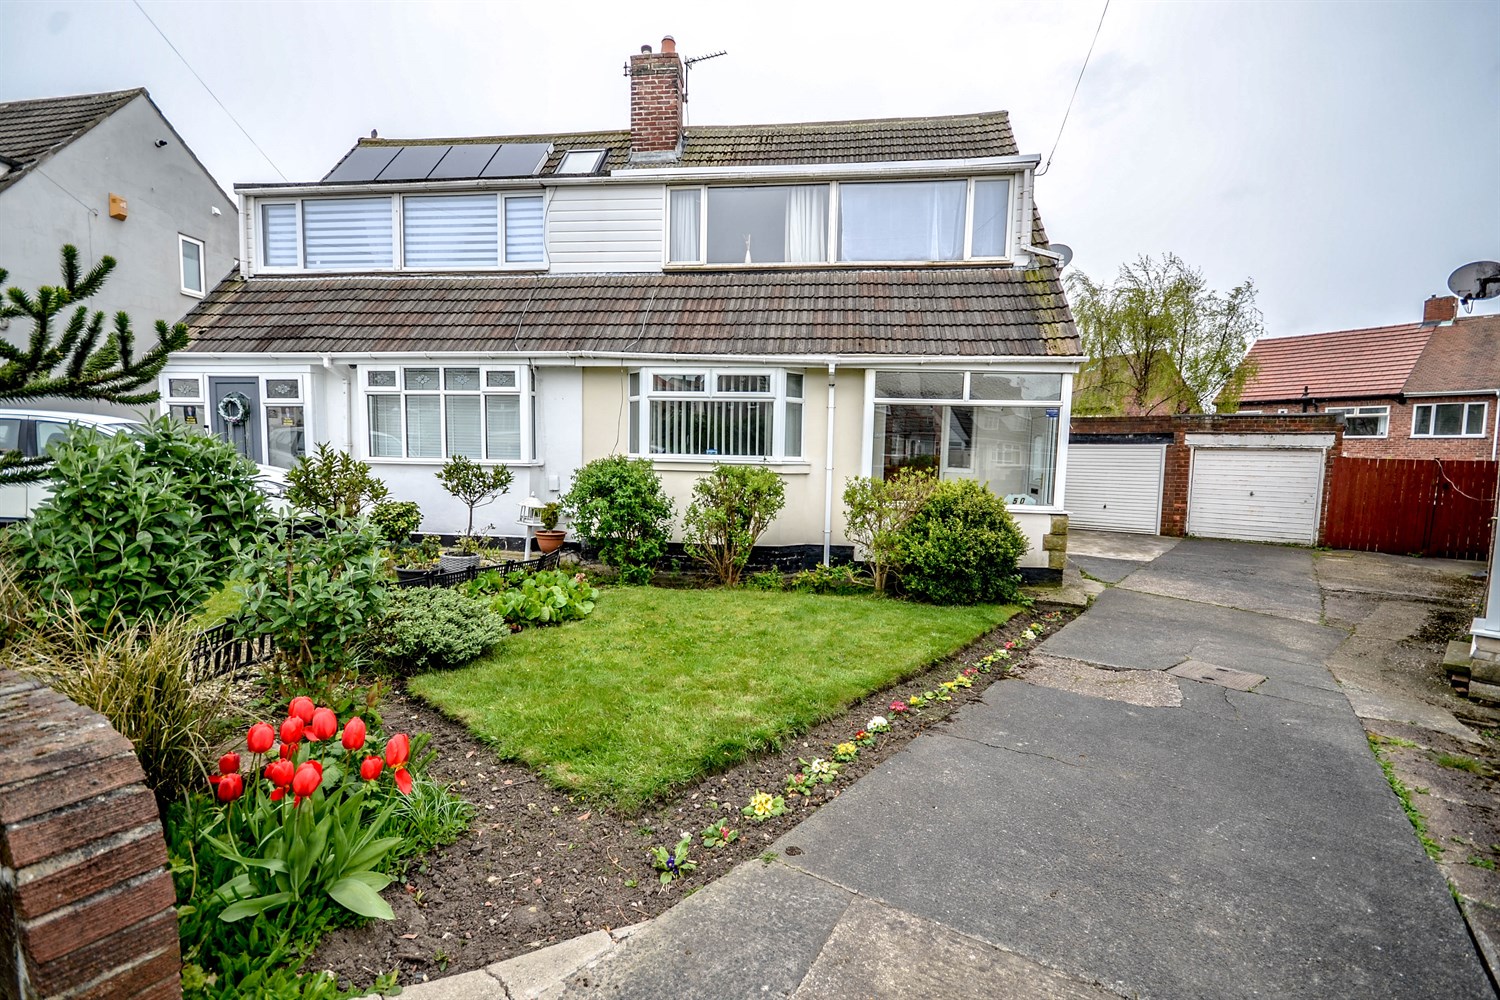 3 bed semi-detached house for sale in Leafield Crescent, South Shields - Property Image 1